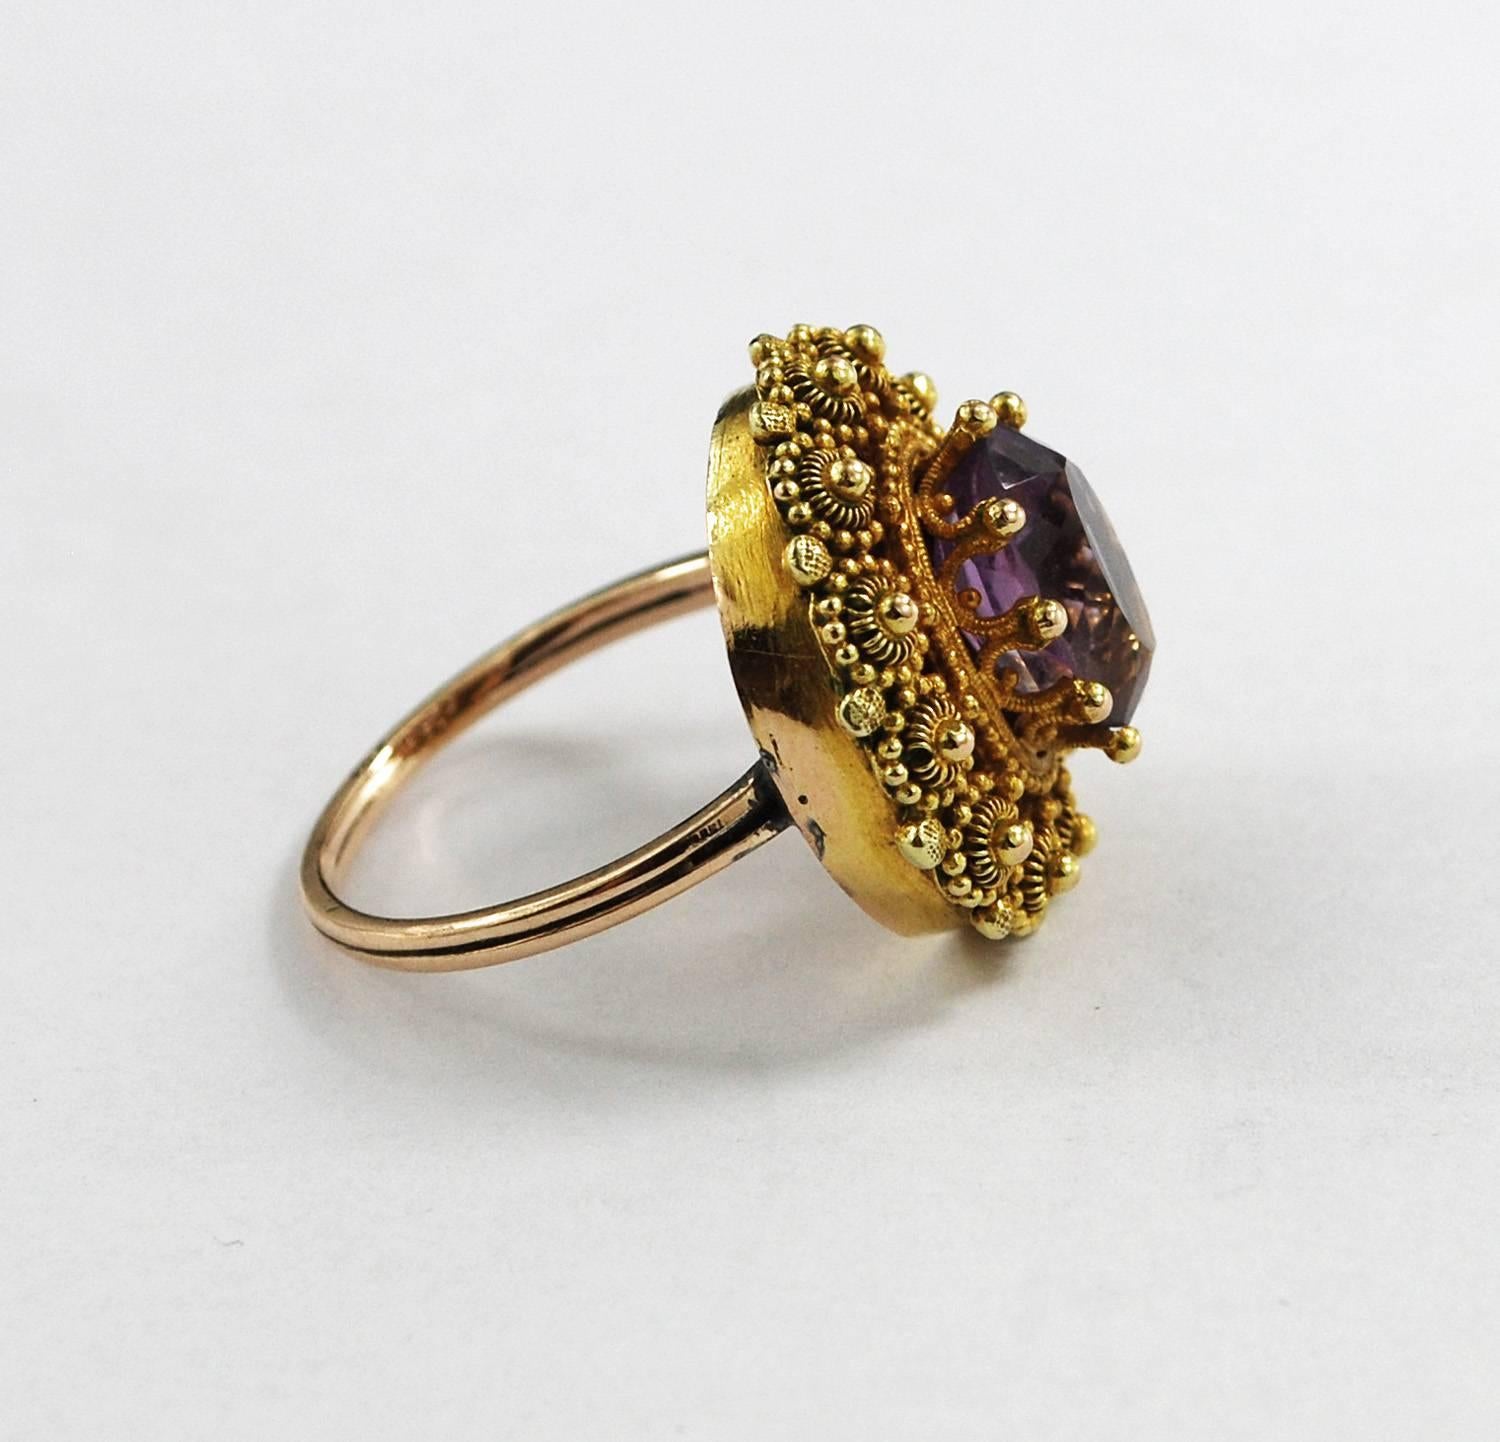 Very rare antique, early 19th century gold ring with oval cut amethyst. Stone is 3/8